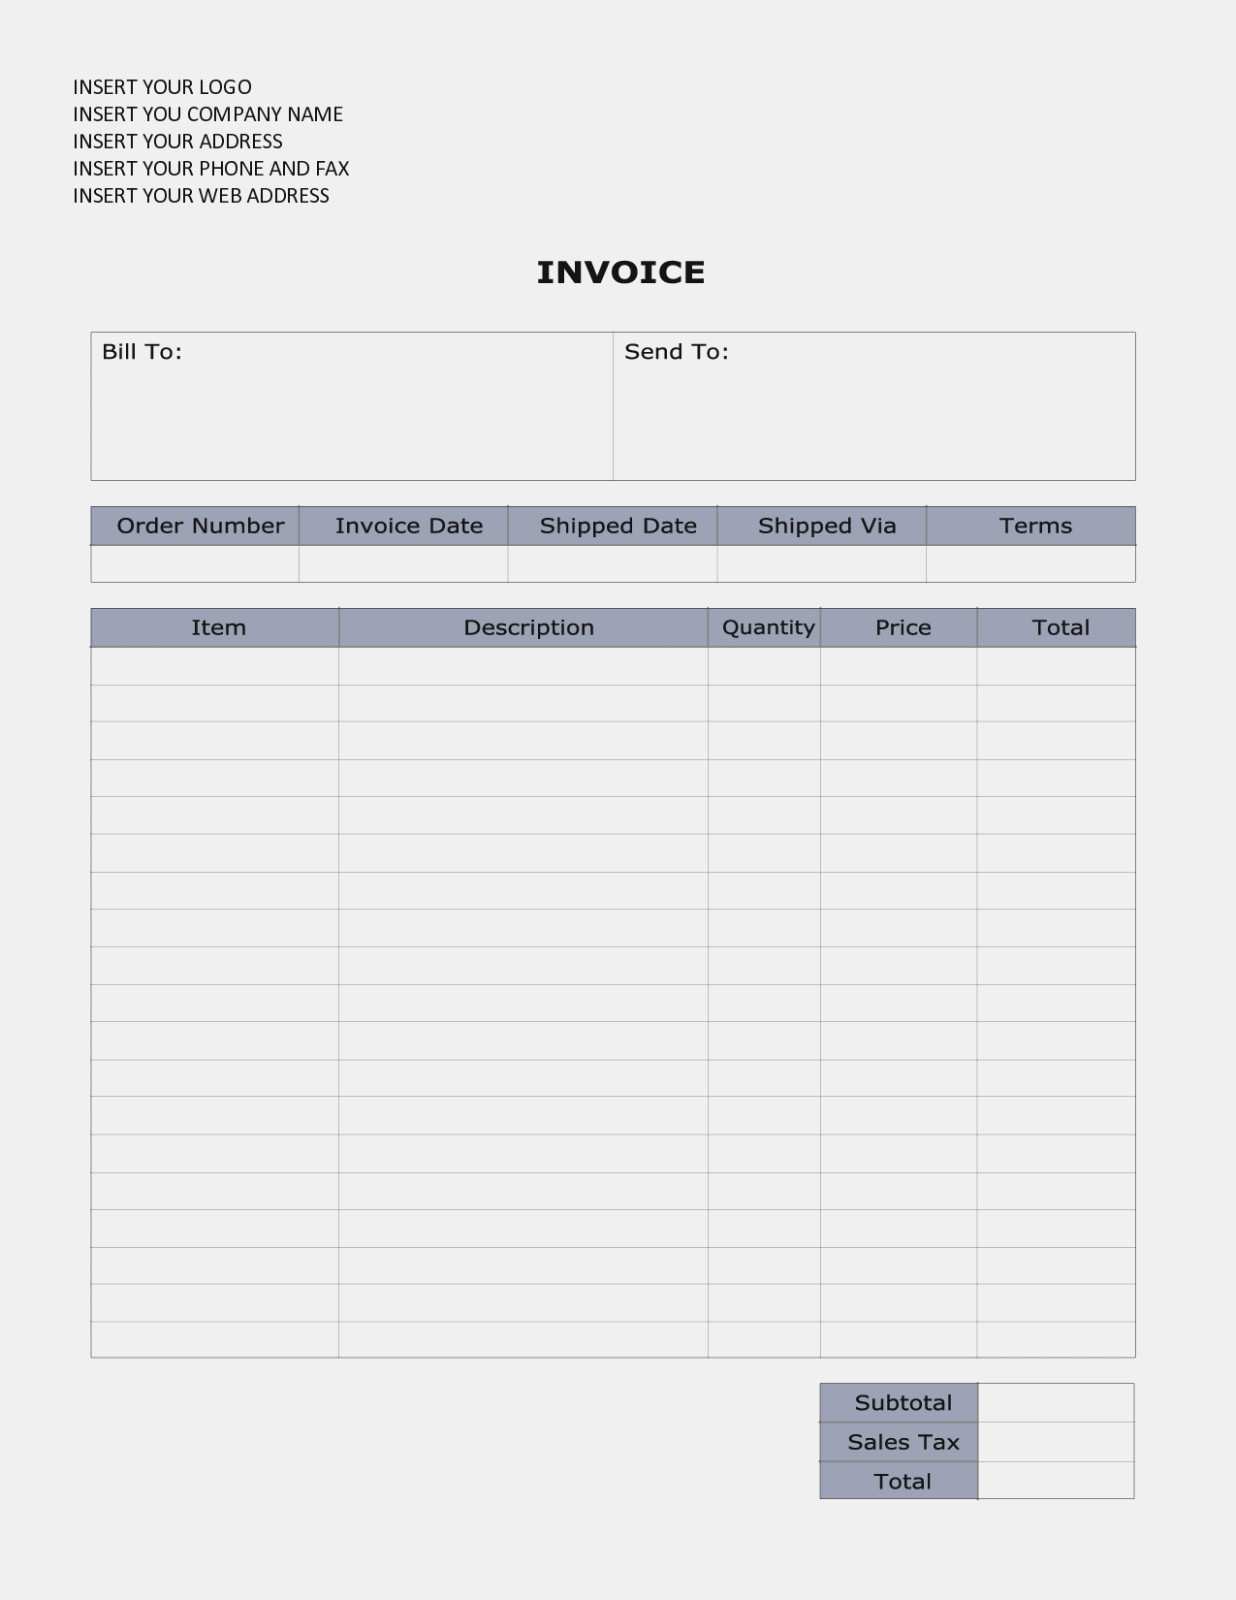 87 Report Blank Invoice Template Uk Photo for Blank Invoice Template Uk